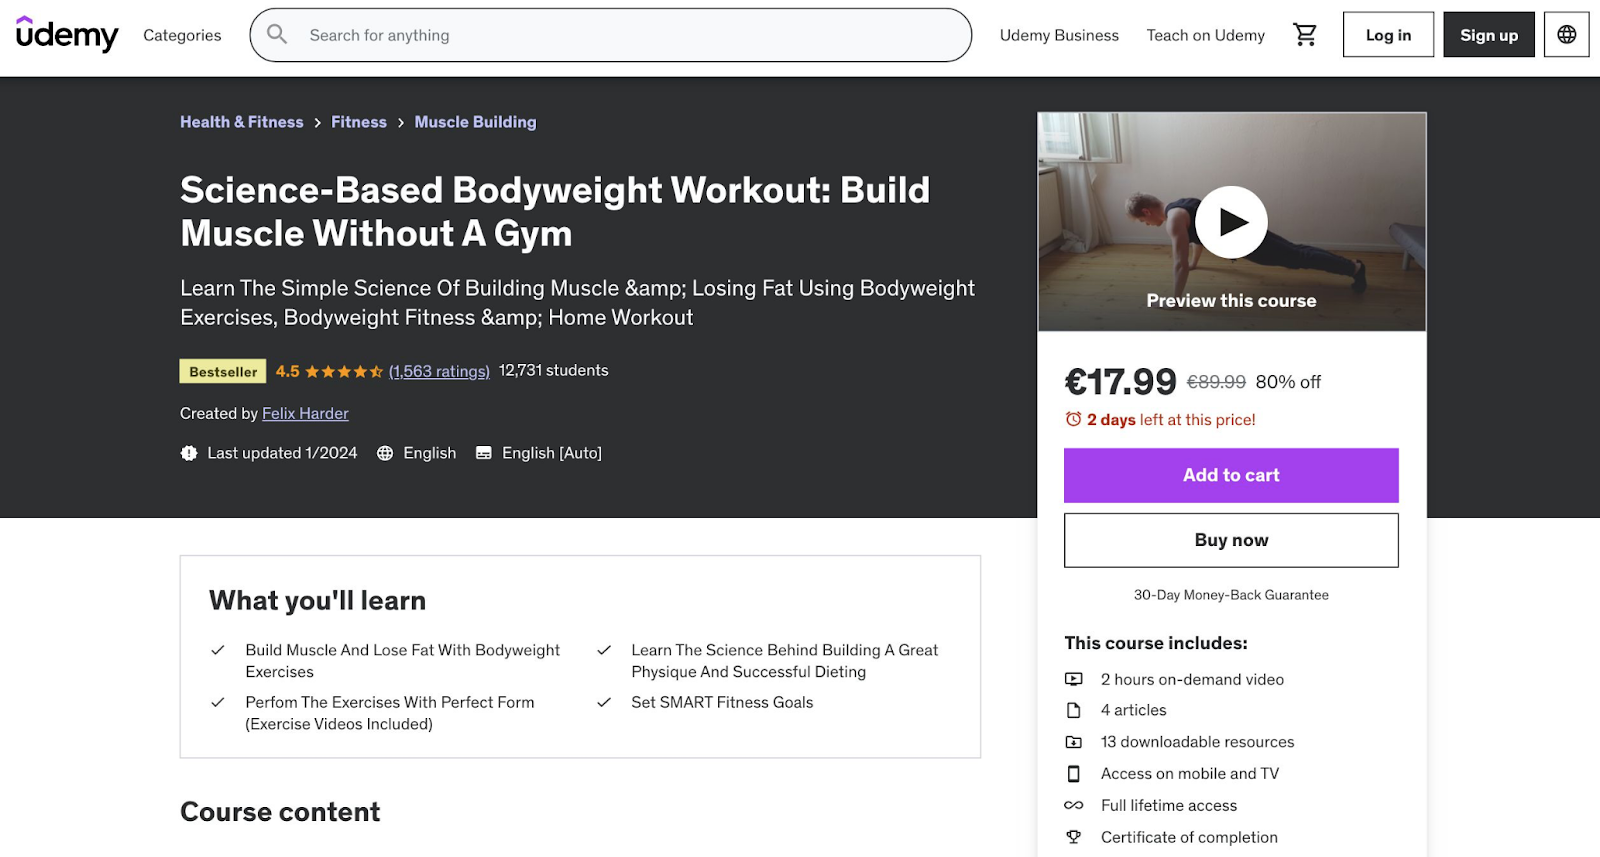  Build Muscle without a Gym" landing page